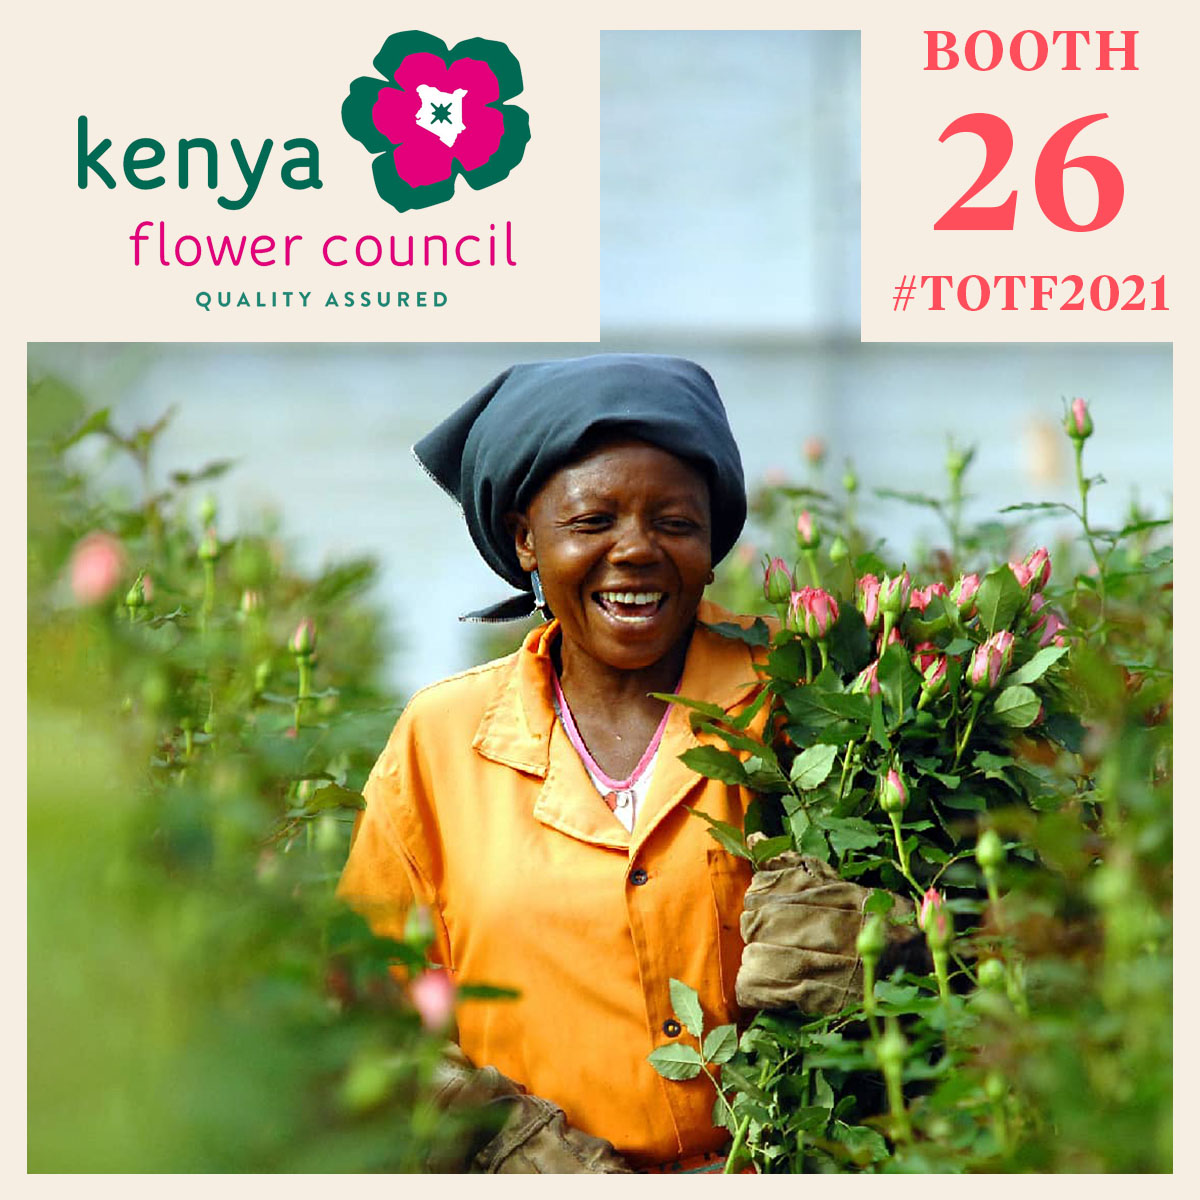 totf2021fe-kfc-is-at-the-forefront-of-promoting-kenyas-floriculture-featured